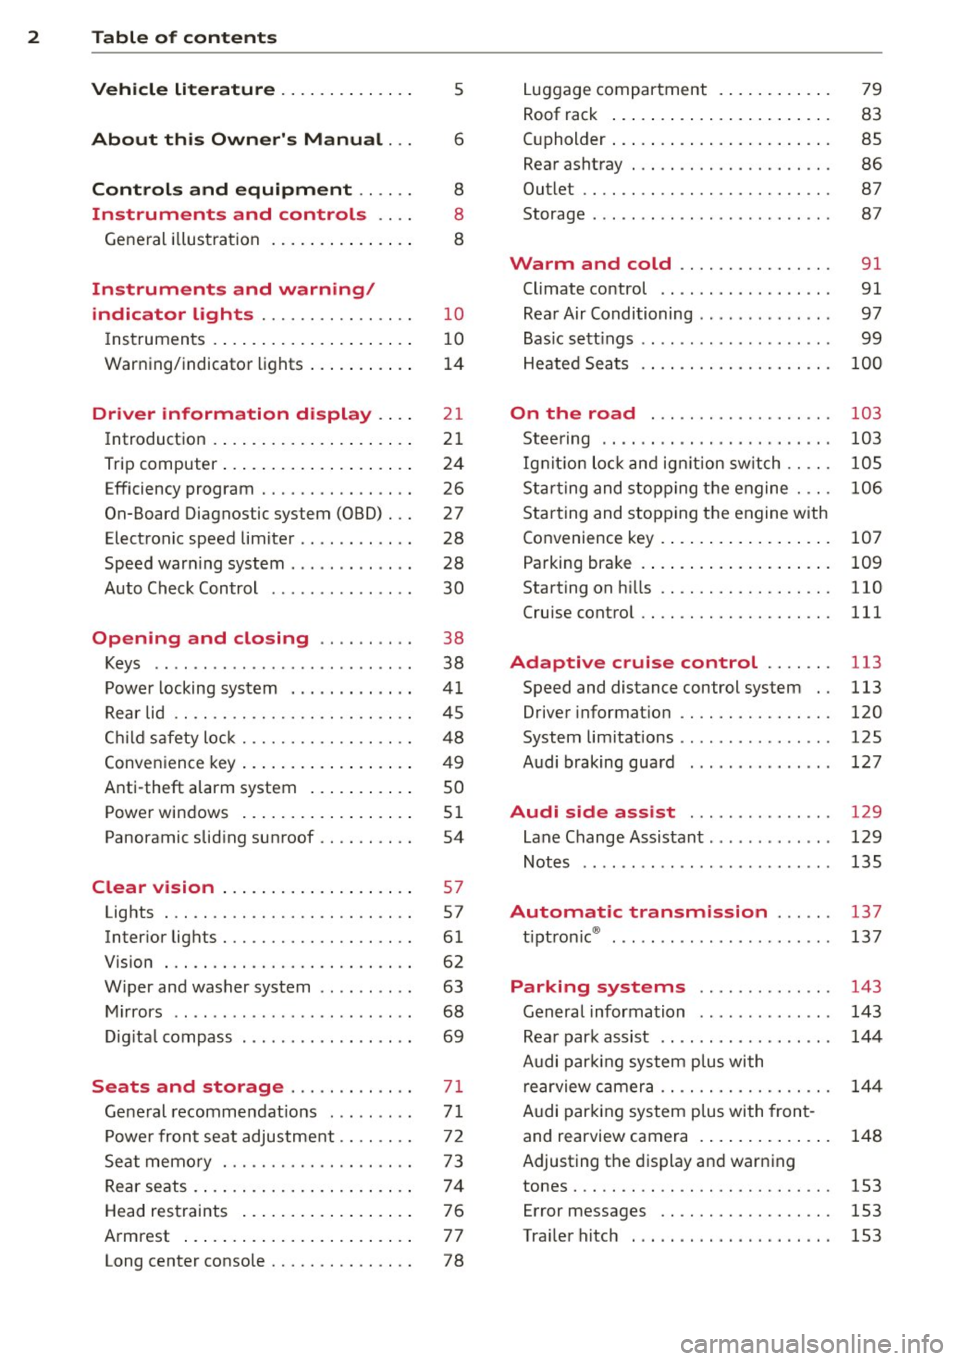 AUDI Q7 2013  Owner´s Manual 2  Table  of  contents Vehicle  literature  .. .. .. .. .. ... . 
About  this  Owners  Manual  ... 
Controls  and  equipment  .. ...  . 
Ins truments  and  controls  .. . . 
General  illus tration  .